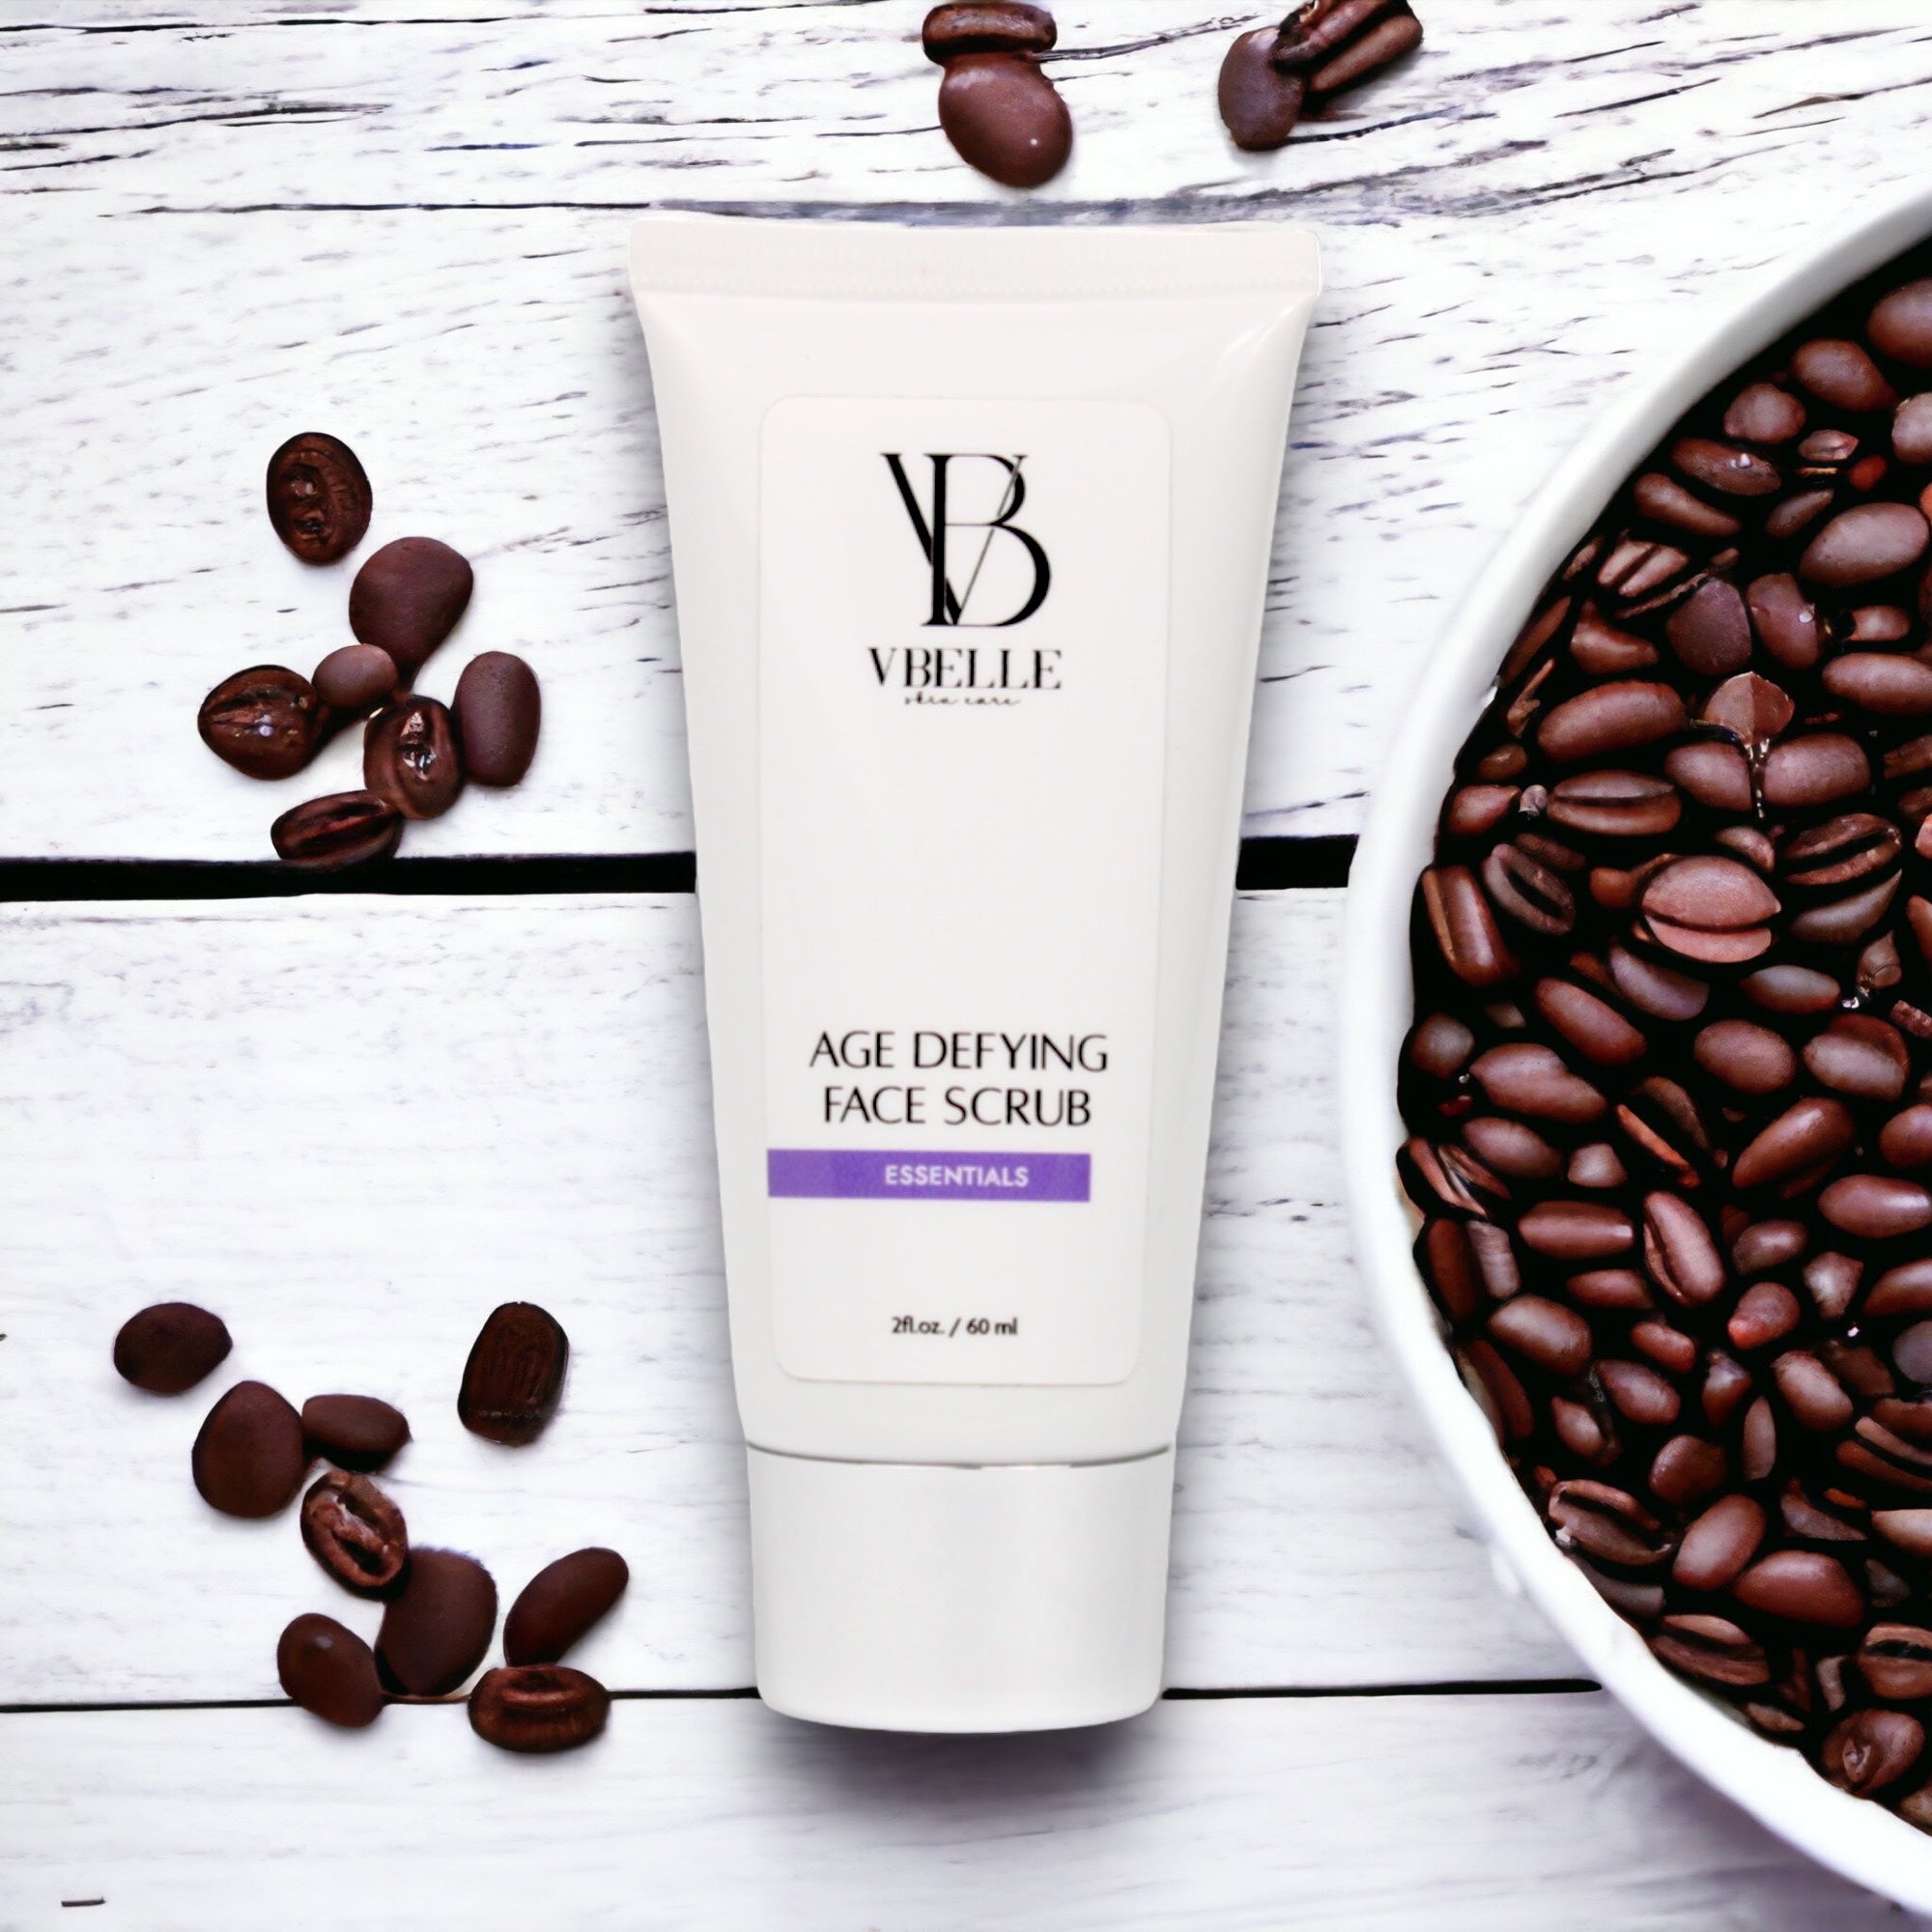 Organic Age Defying Face Scrub tube surrounded by coffee beans